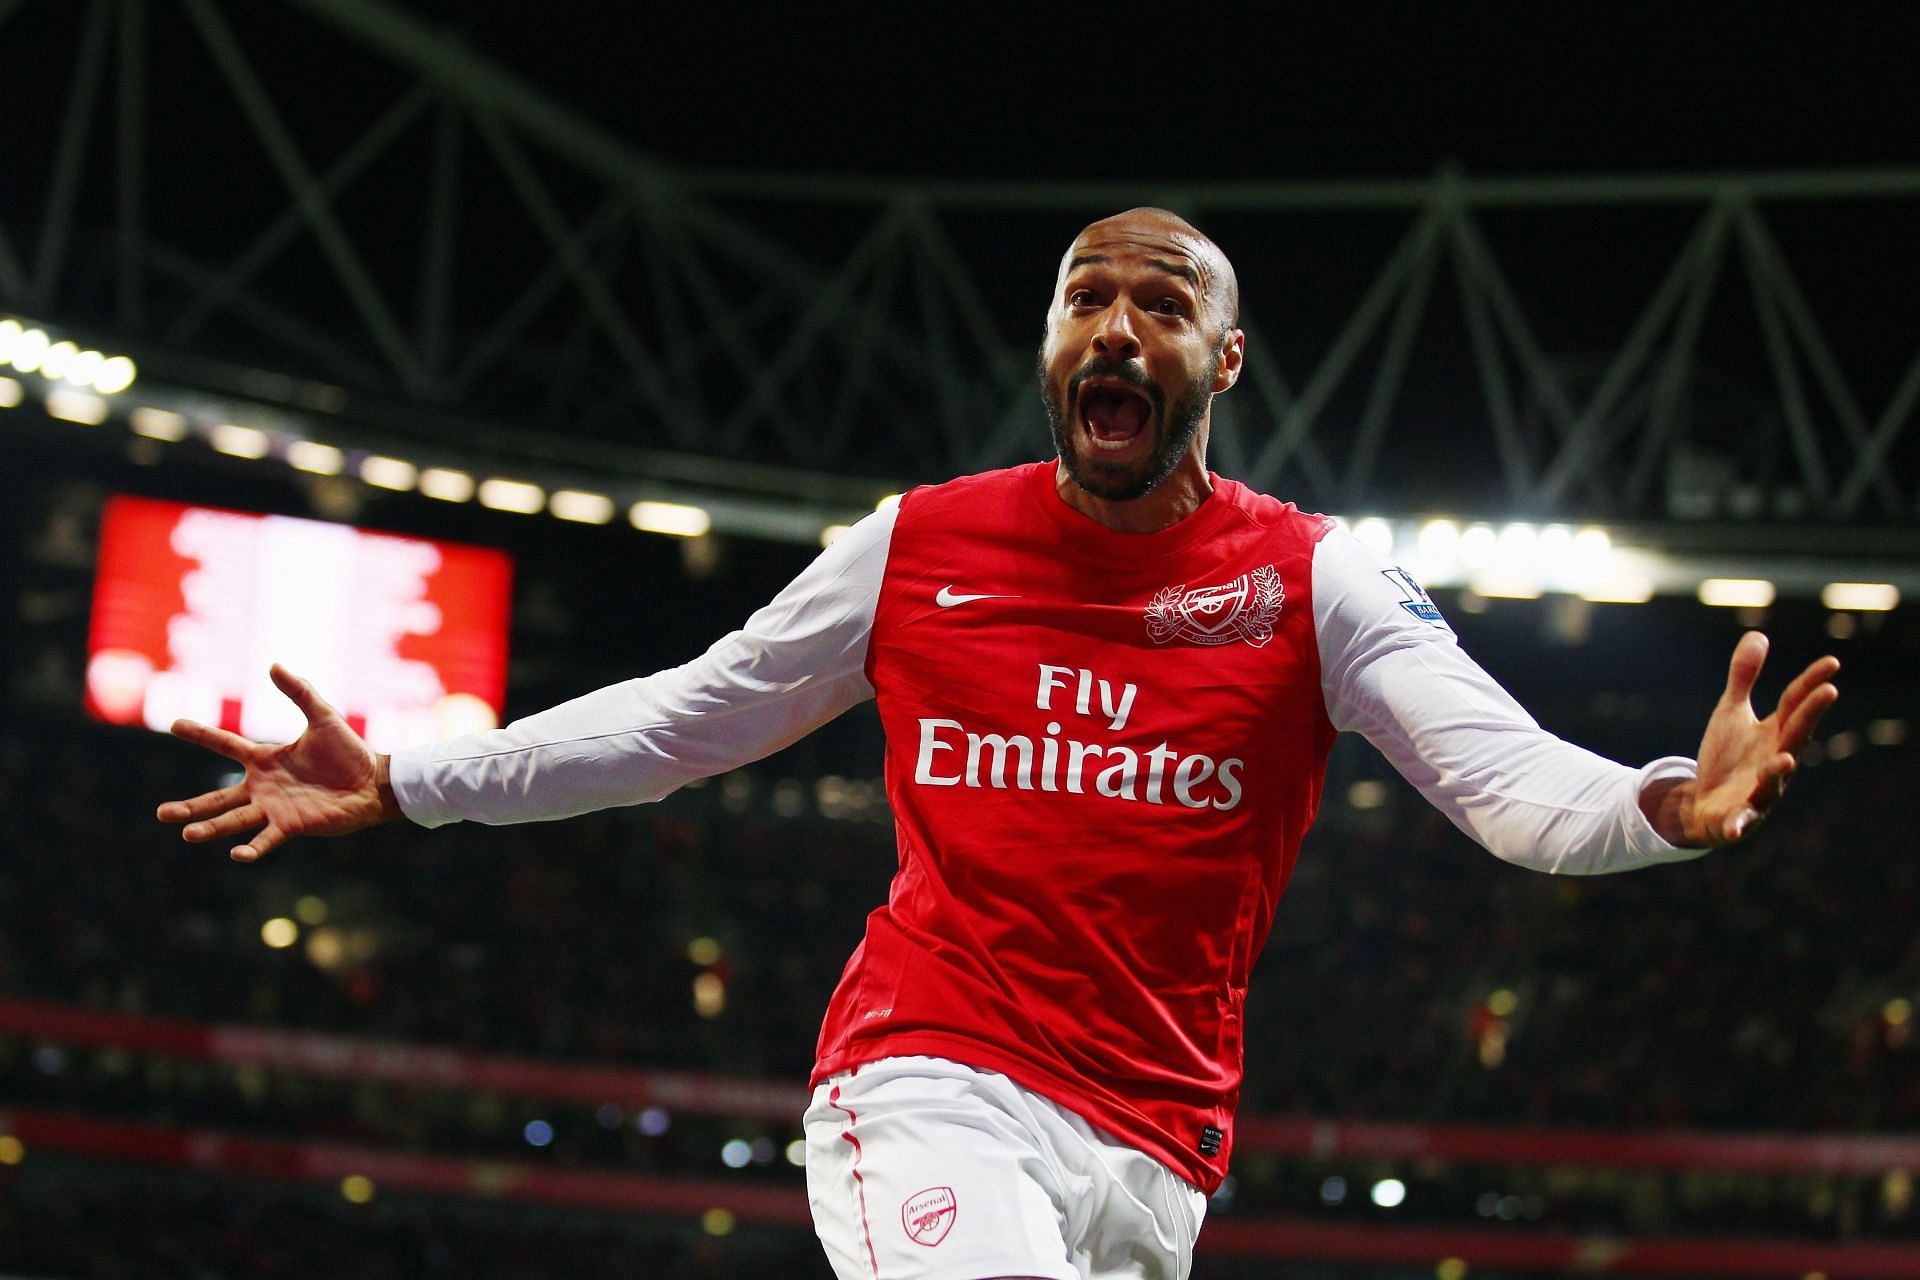 Thierry Henry has won the most number of Golden Boots so far in the Premier League